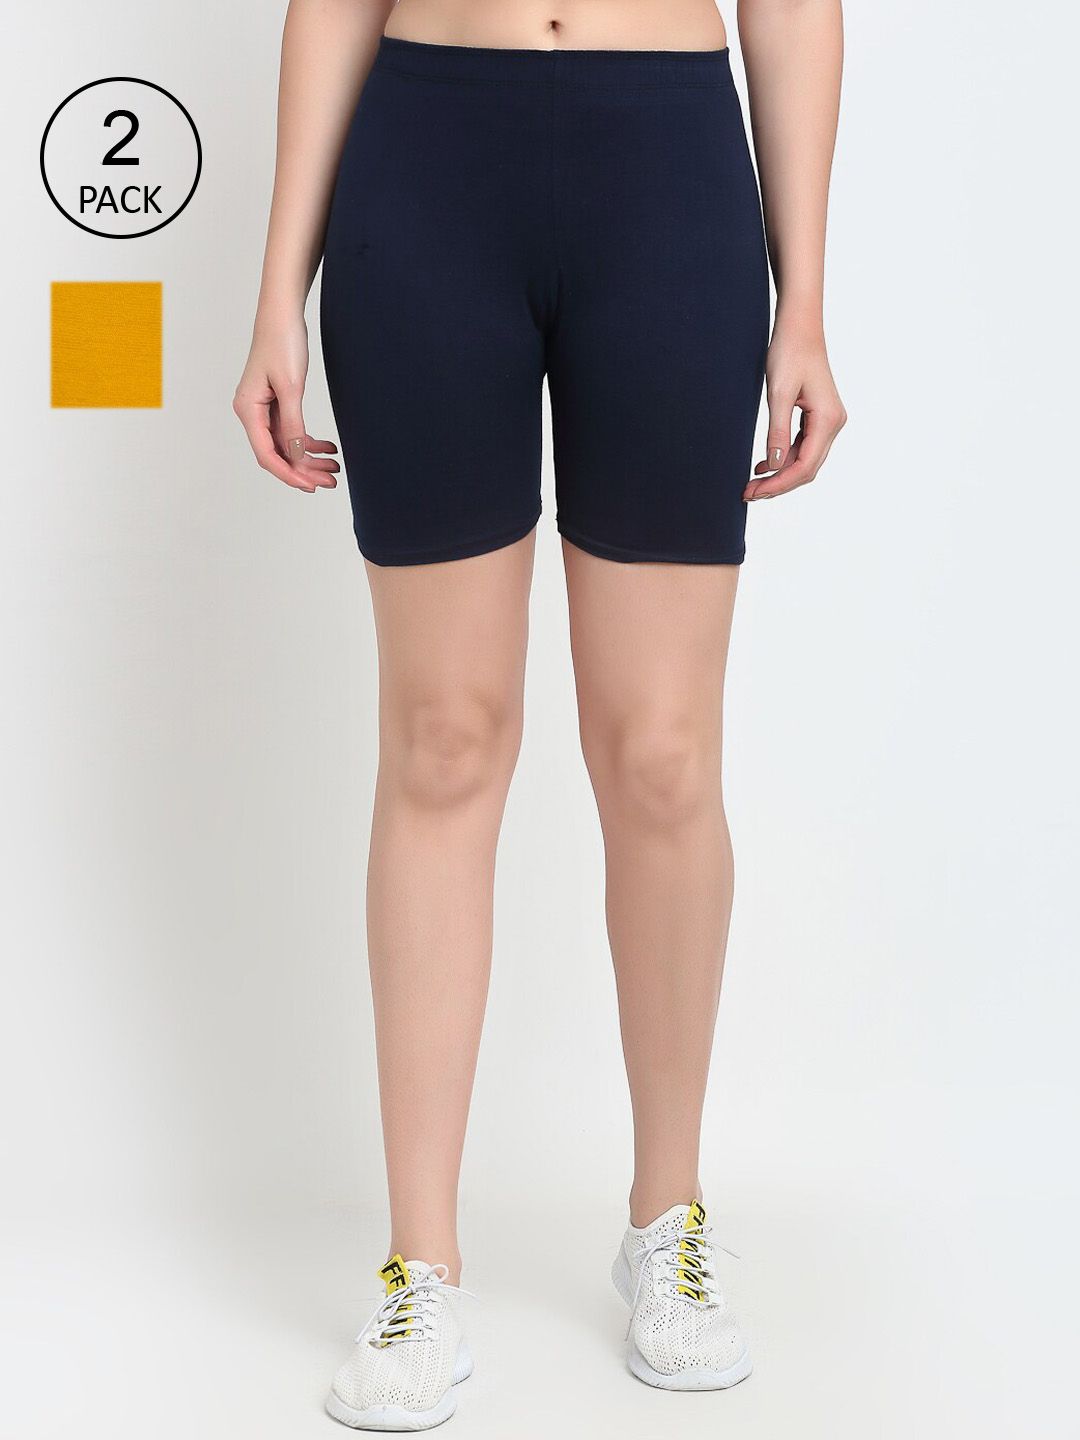 GRACIT Women Set Of 2 Navy Blue & Yellow Slim Fit Cycling Sports Shorts Price in India